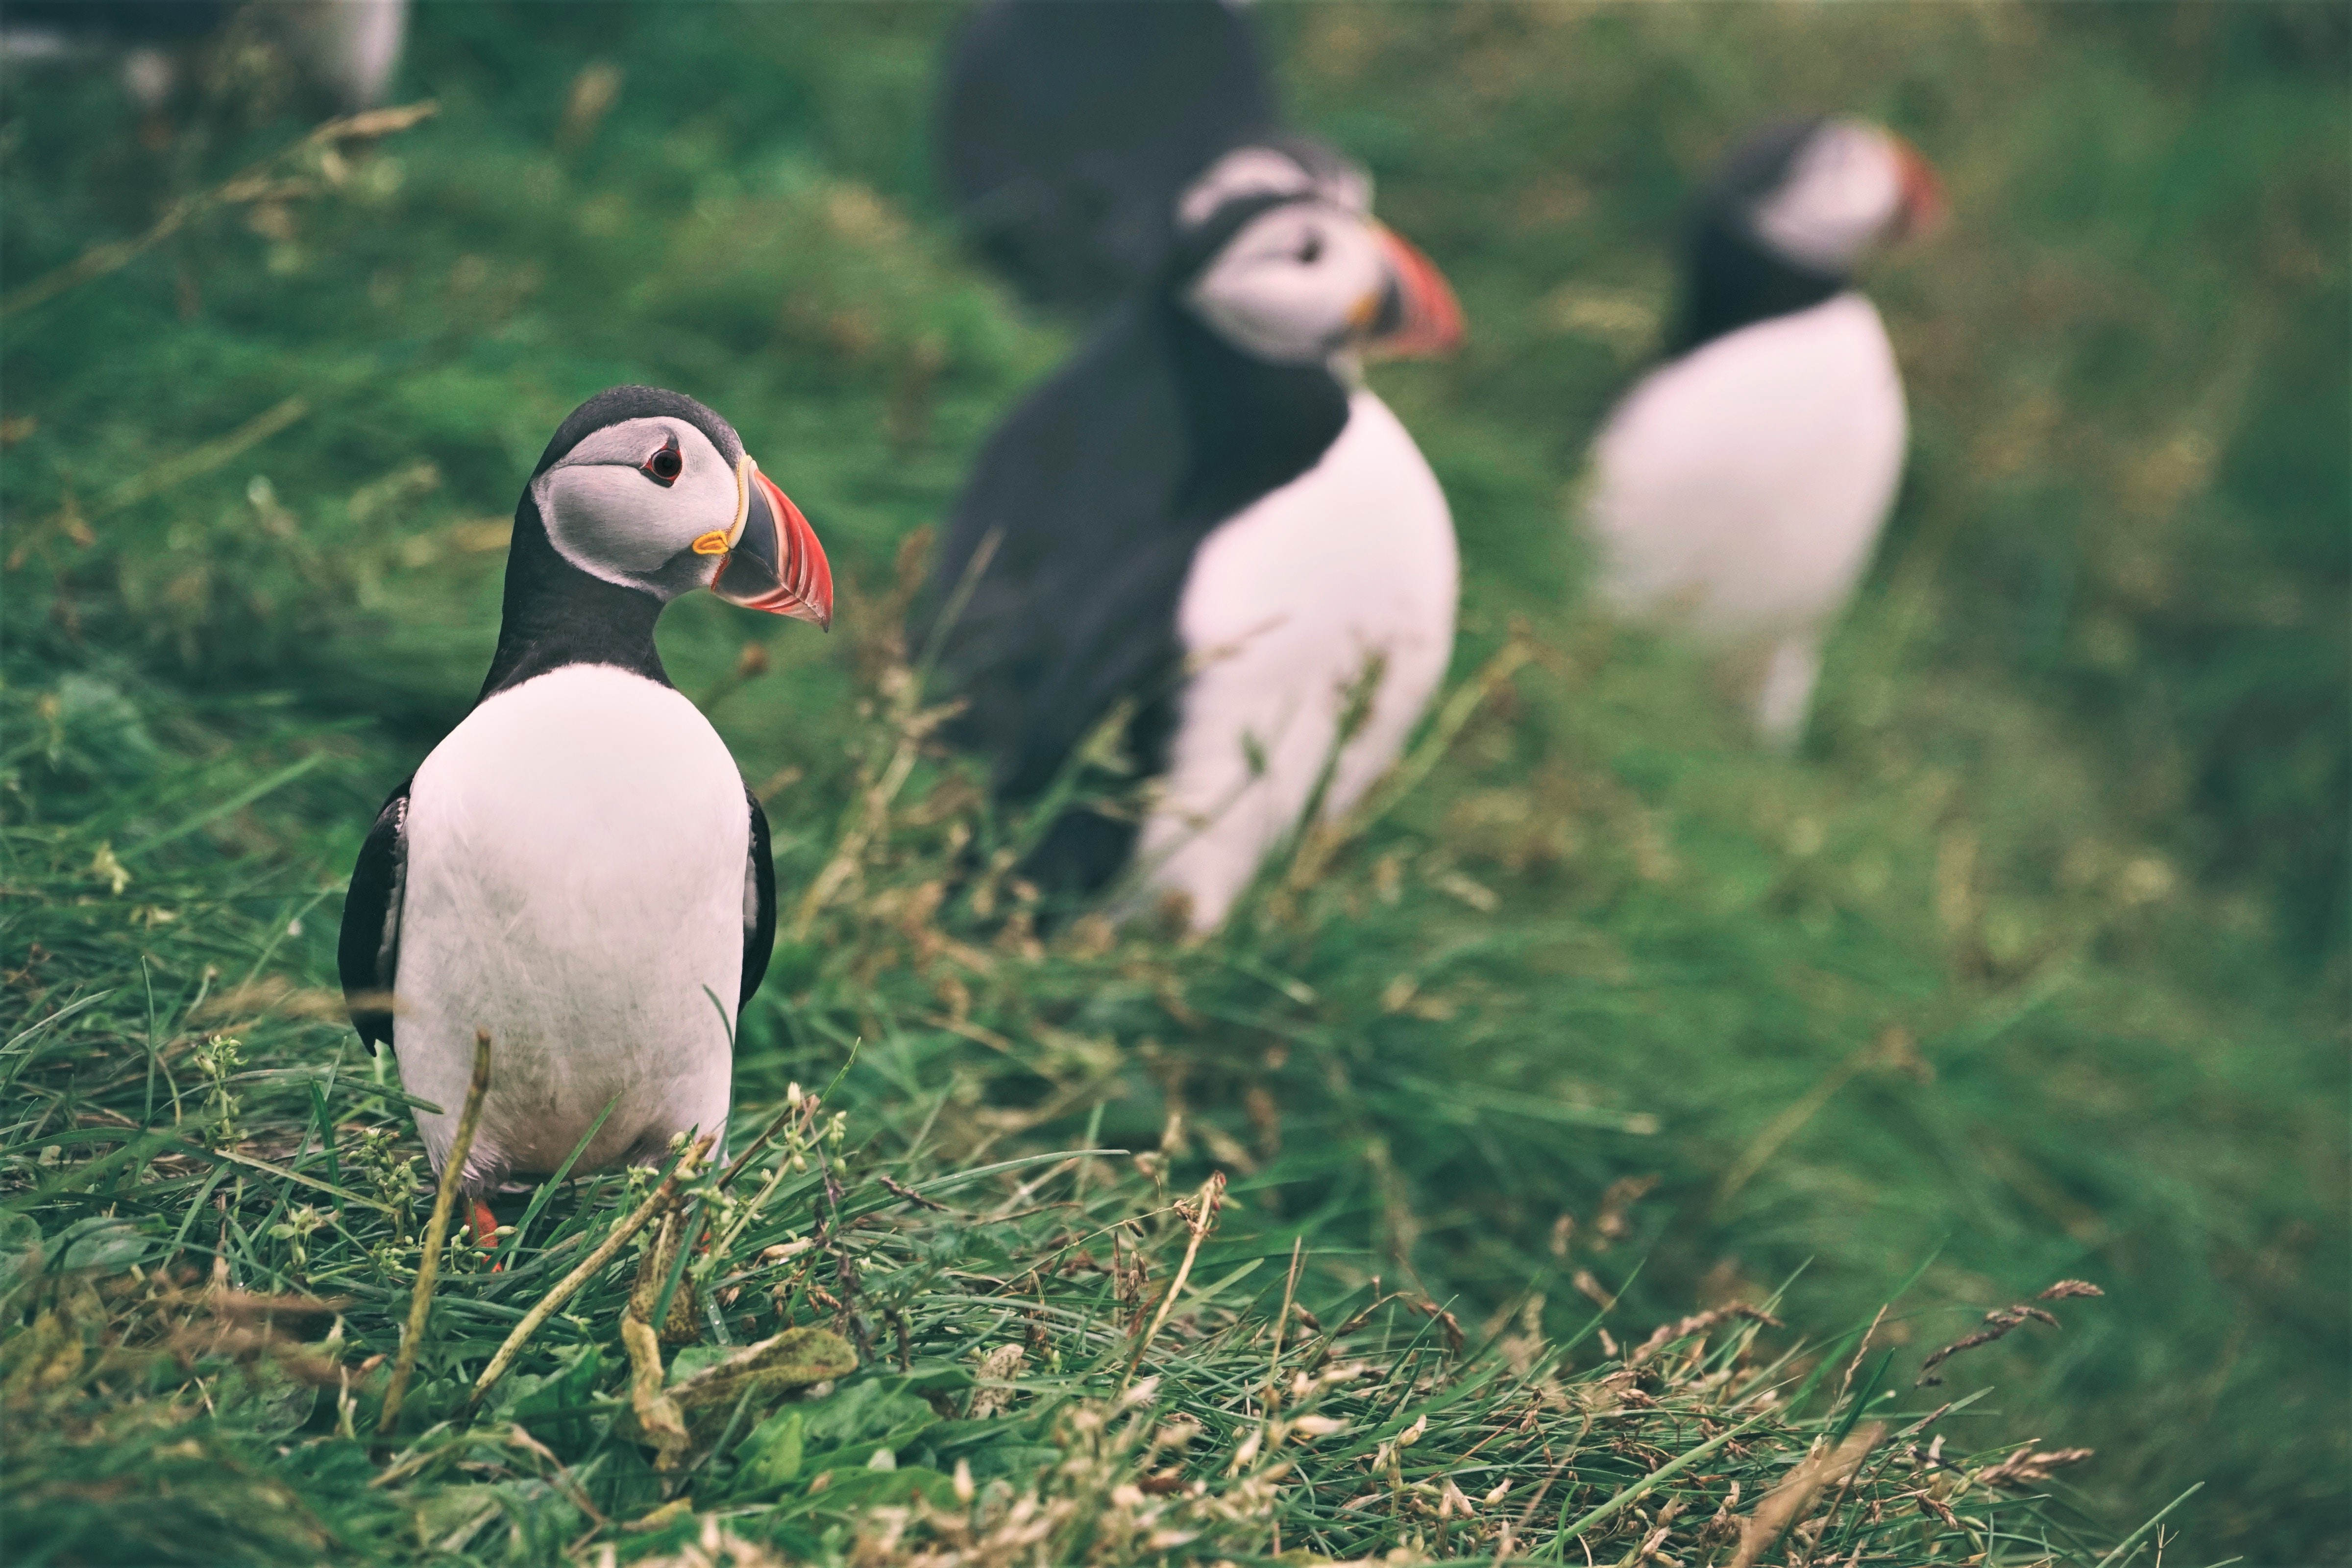 Puffins in Iceland in the summer